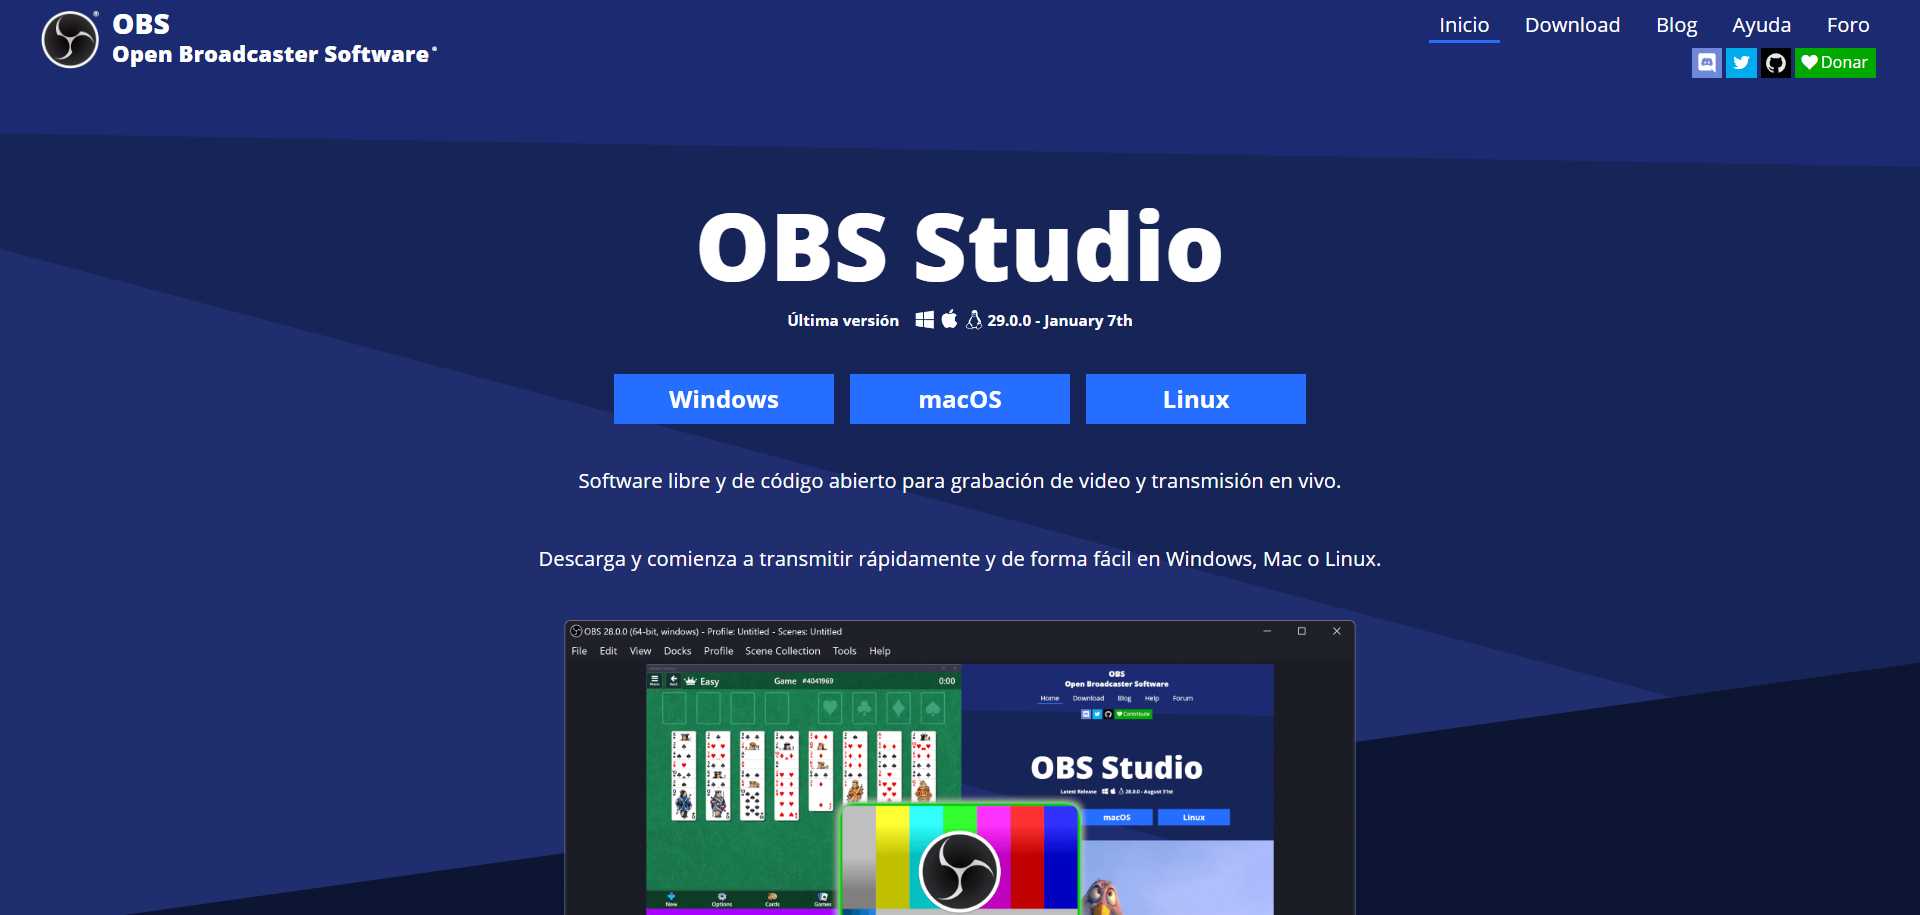 FireShot Capture 1173 - Open Broadcaster Software - OBS - obsproject.com.png